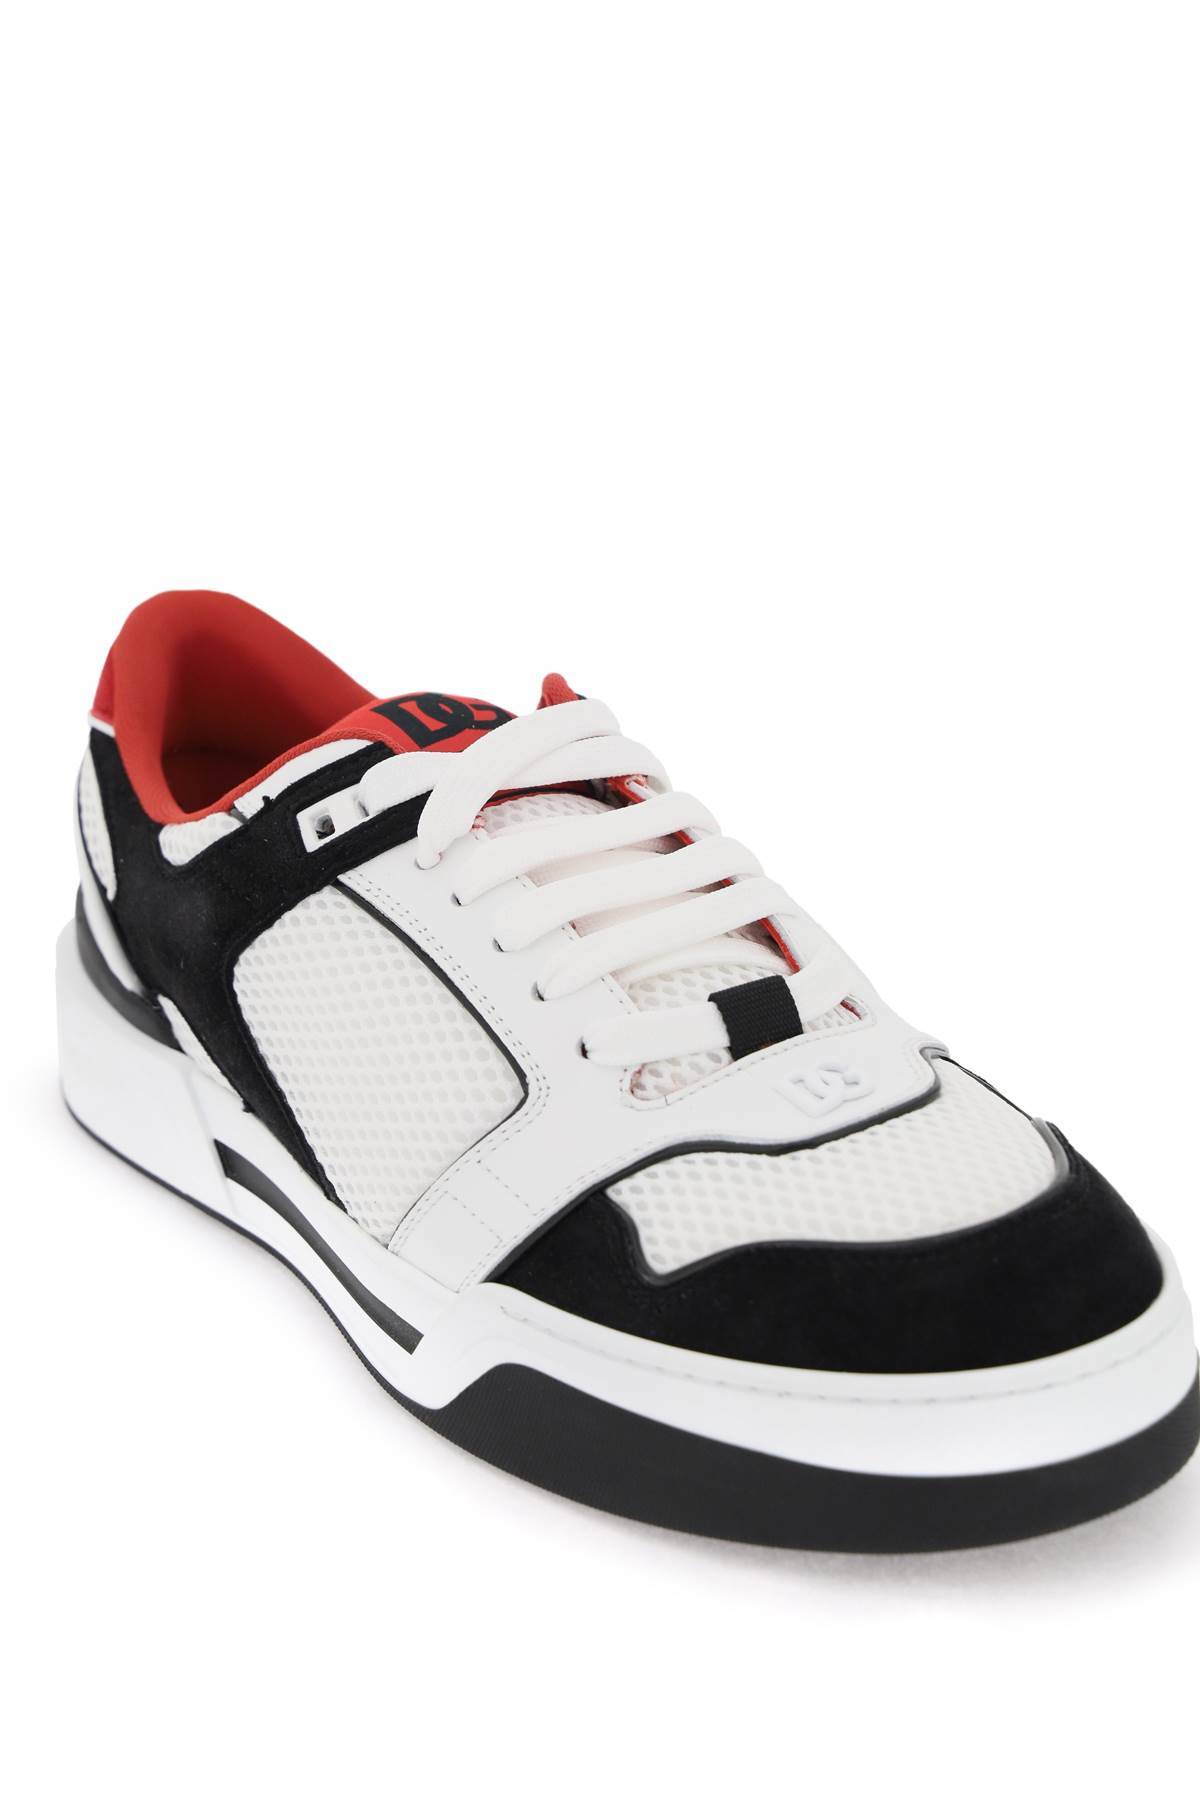 Shop Dolce & Gabbana New Roma Sneakers In White,black,red